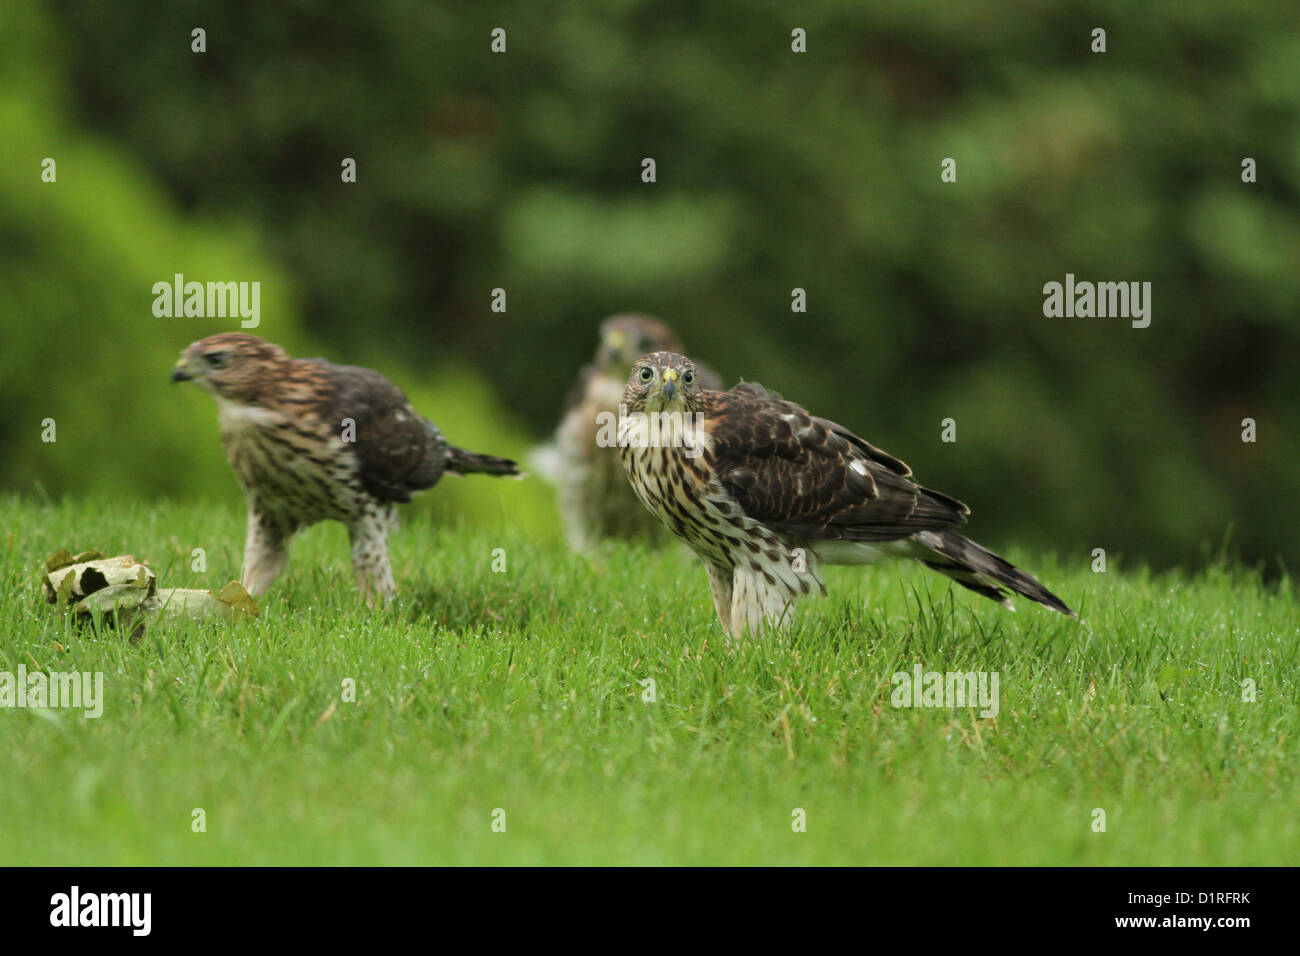 Juveniles Cooper's hawks (Accipiter cooperii) in the forest Stock Photo